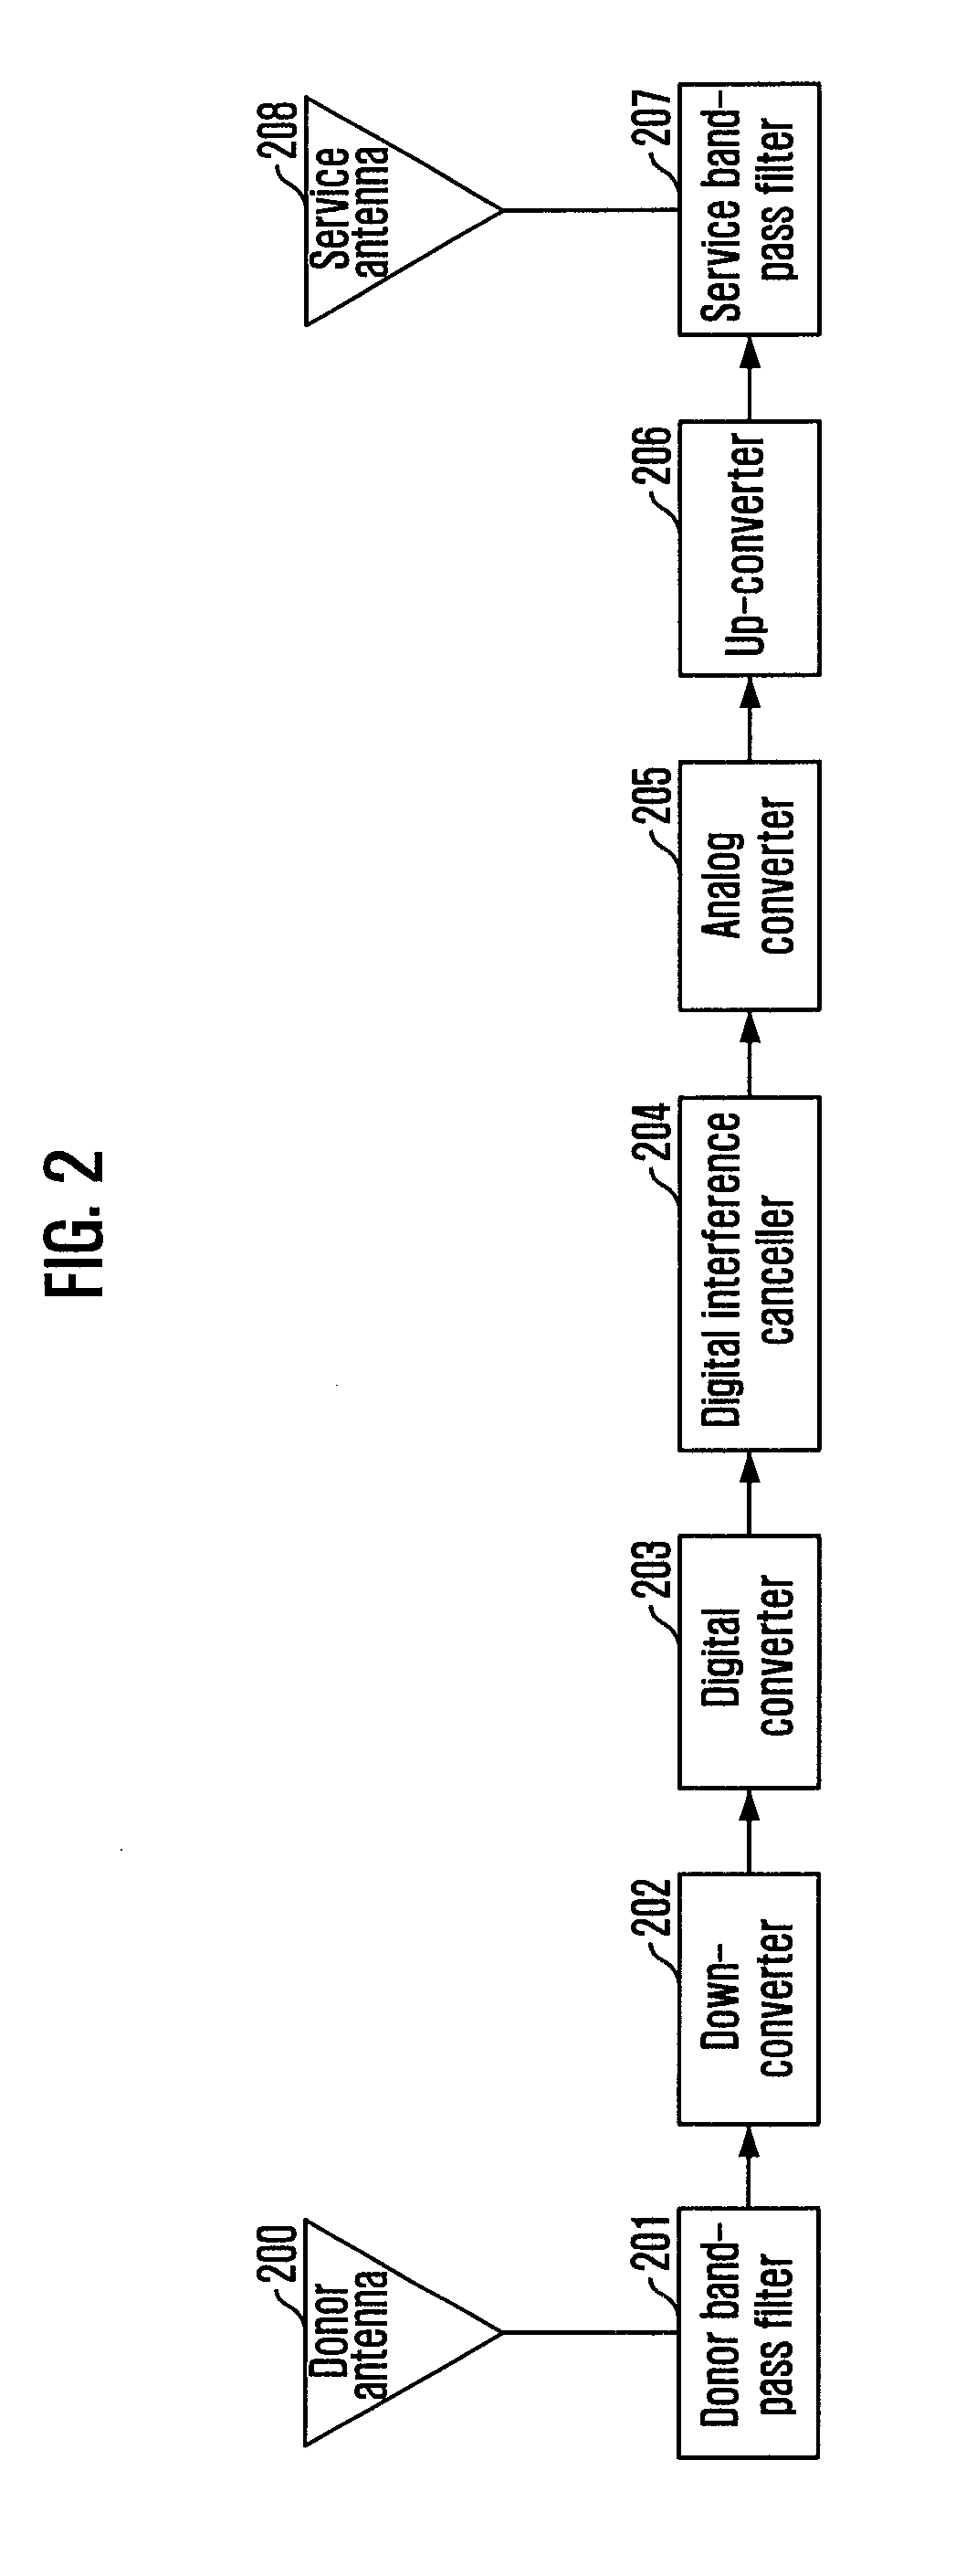 Wireless repeater apparatus for canceling interference signal